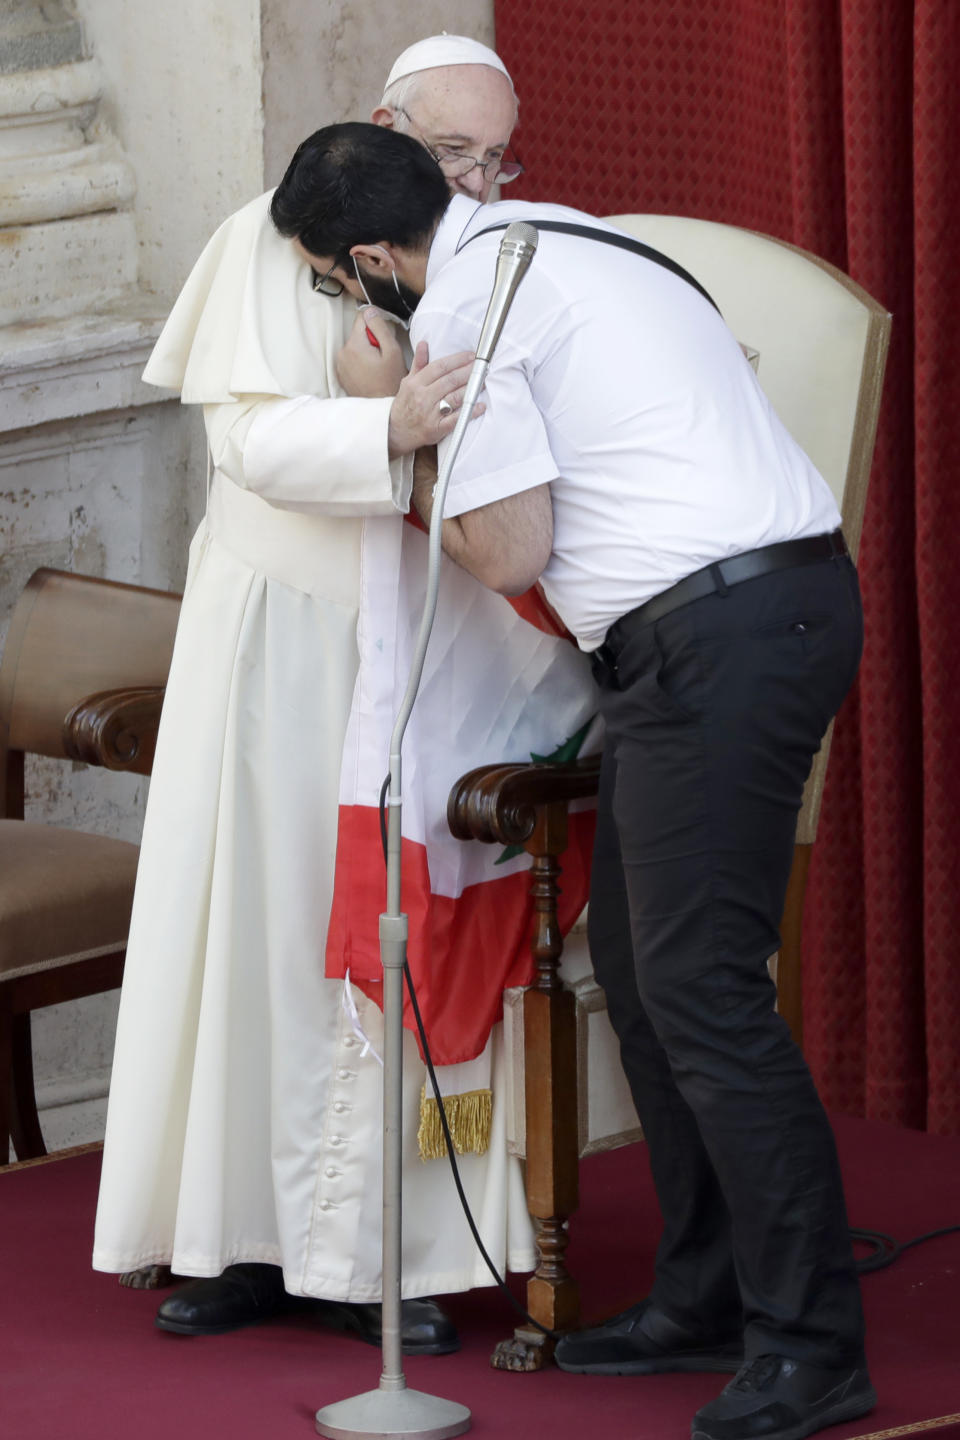 Pope Francis is hugged by Lebanese priest Georges Breidi as they hold a Lebanese flag in remembrance of last month's explosion in Beirut, during the pontiff's general audience, the first with faithful since February when the coronavirus outbreak broke out, at the San Damaso courtyard, at the Vatican, Wednesday, Sept. 2, 2020. (AP Photo/Andrew Medichini)